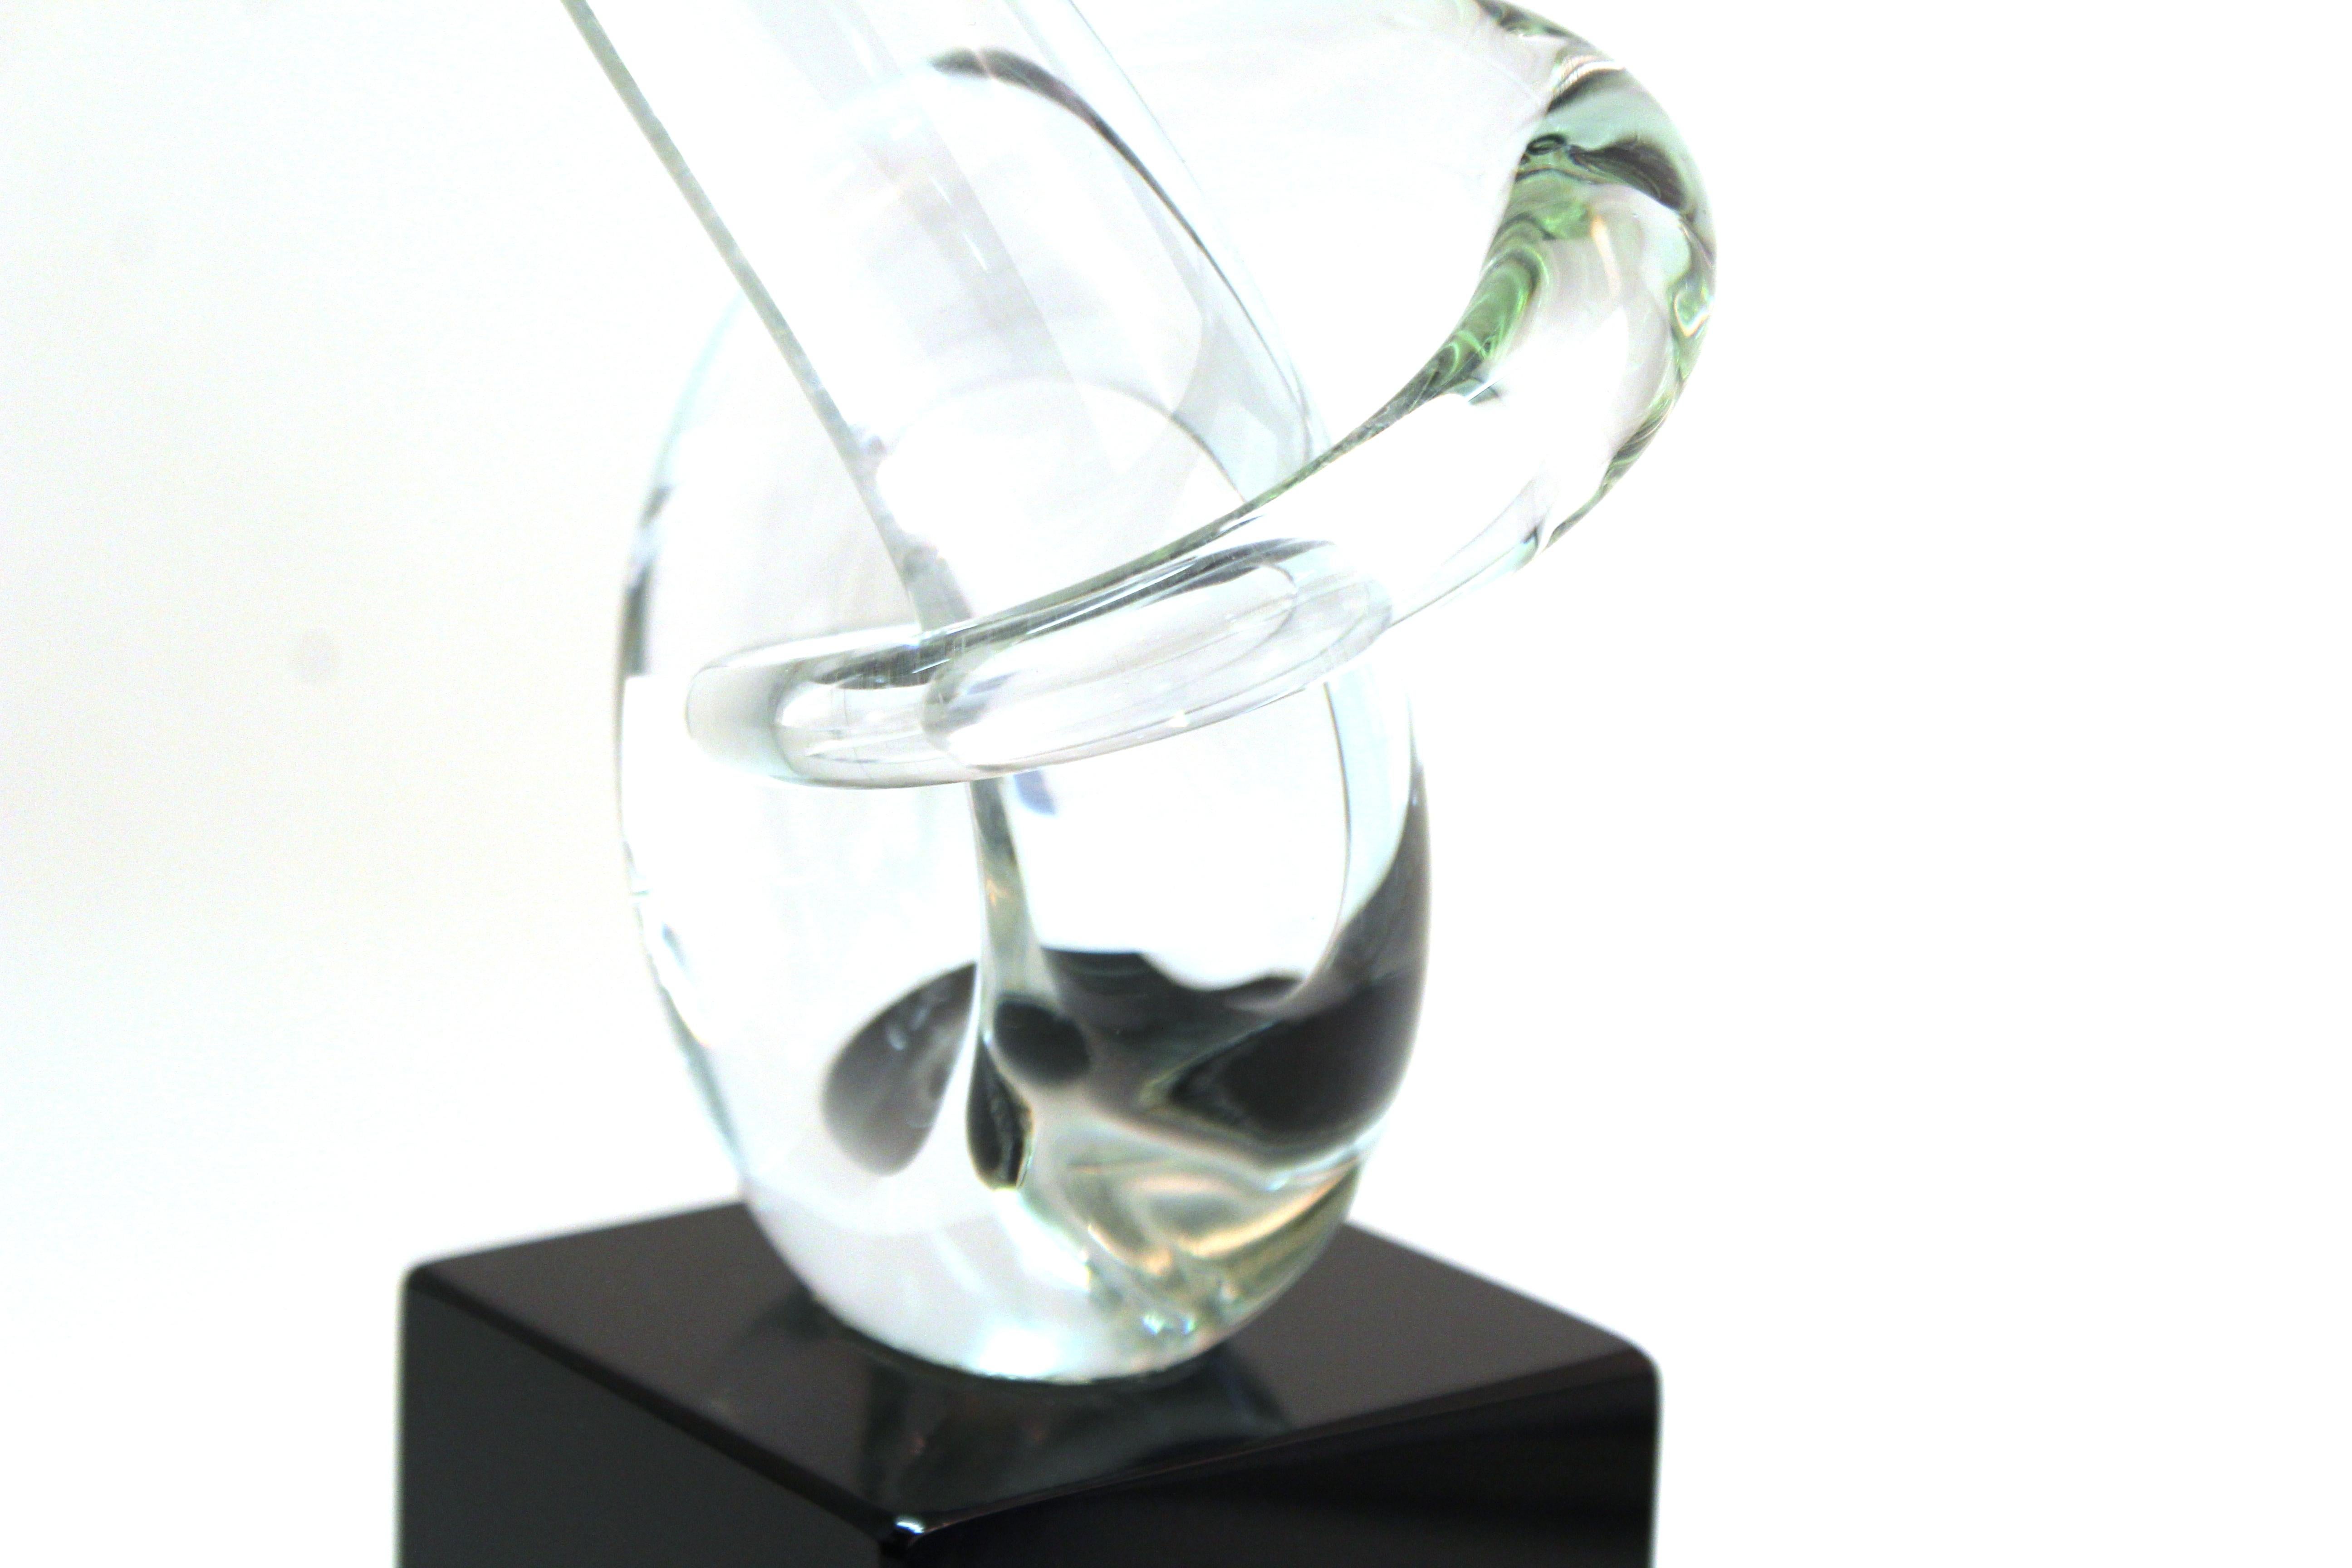 Italian Modern Abstract Art Glass Sculpture Signed Auotra 1